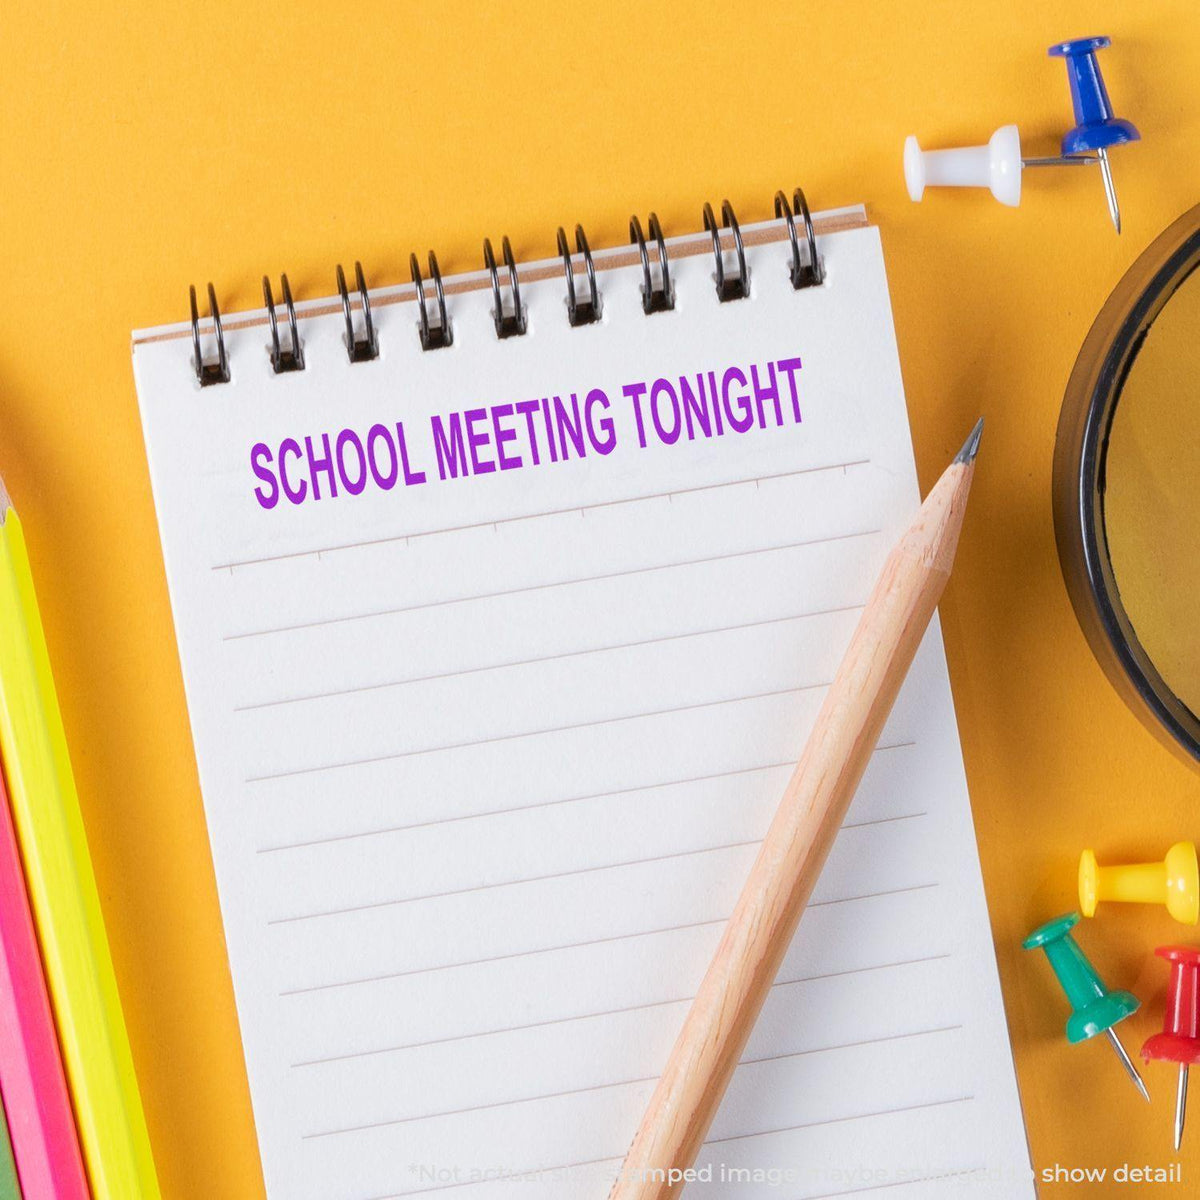 Large School Meeting Tonight Rubber Stamp In Use Photo